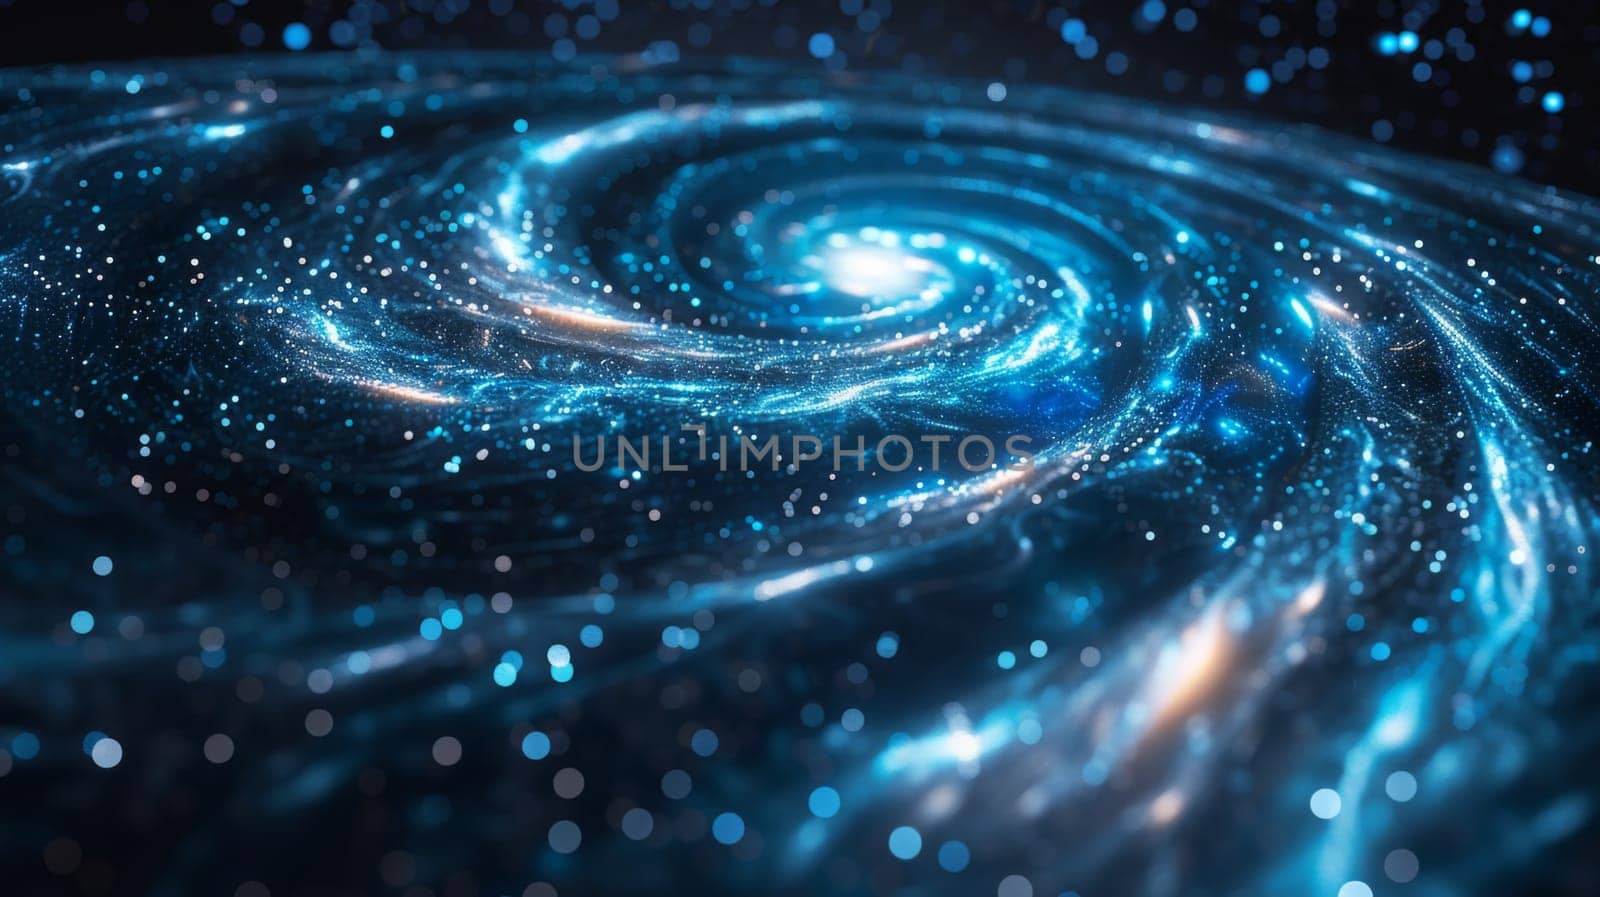 A spiral galaxy with blue and white lights